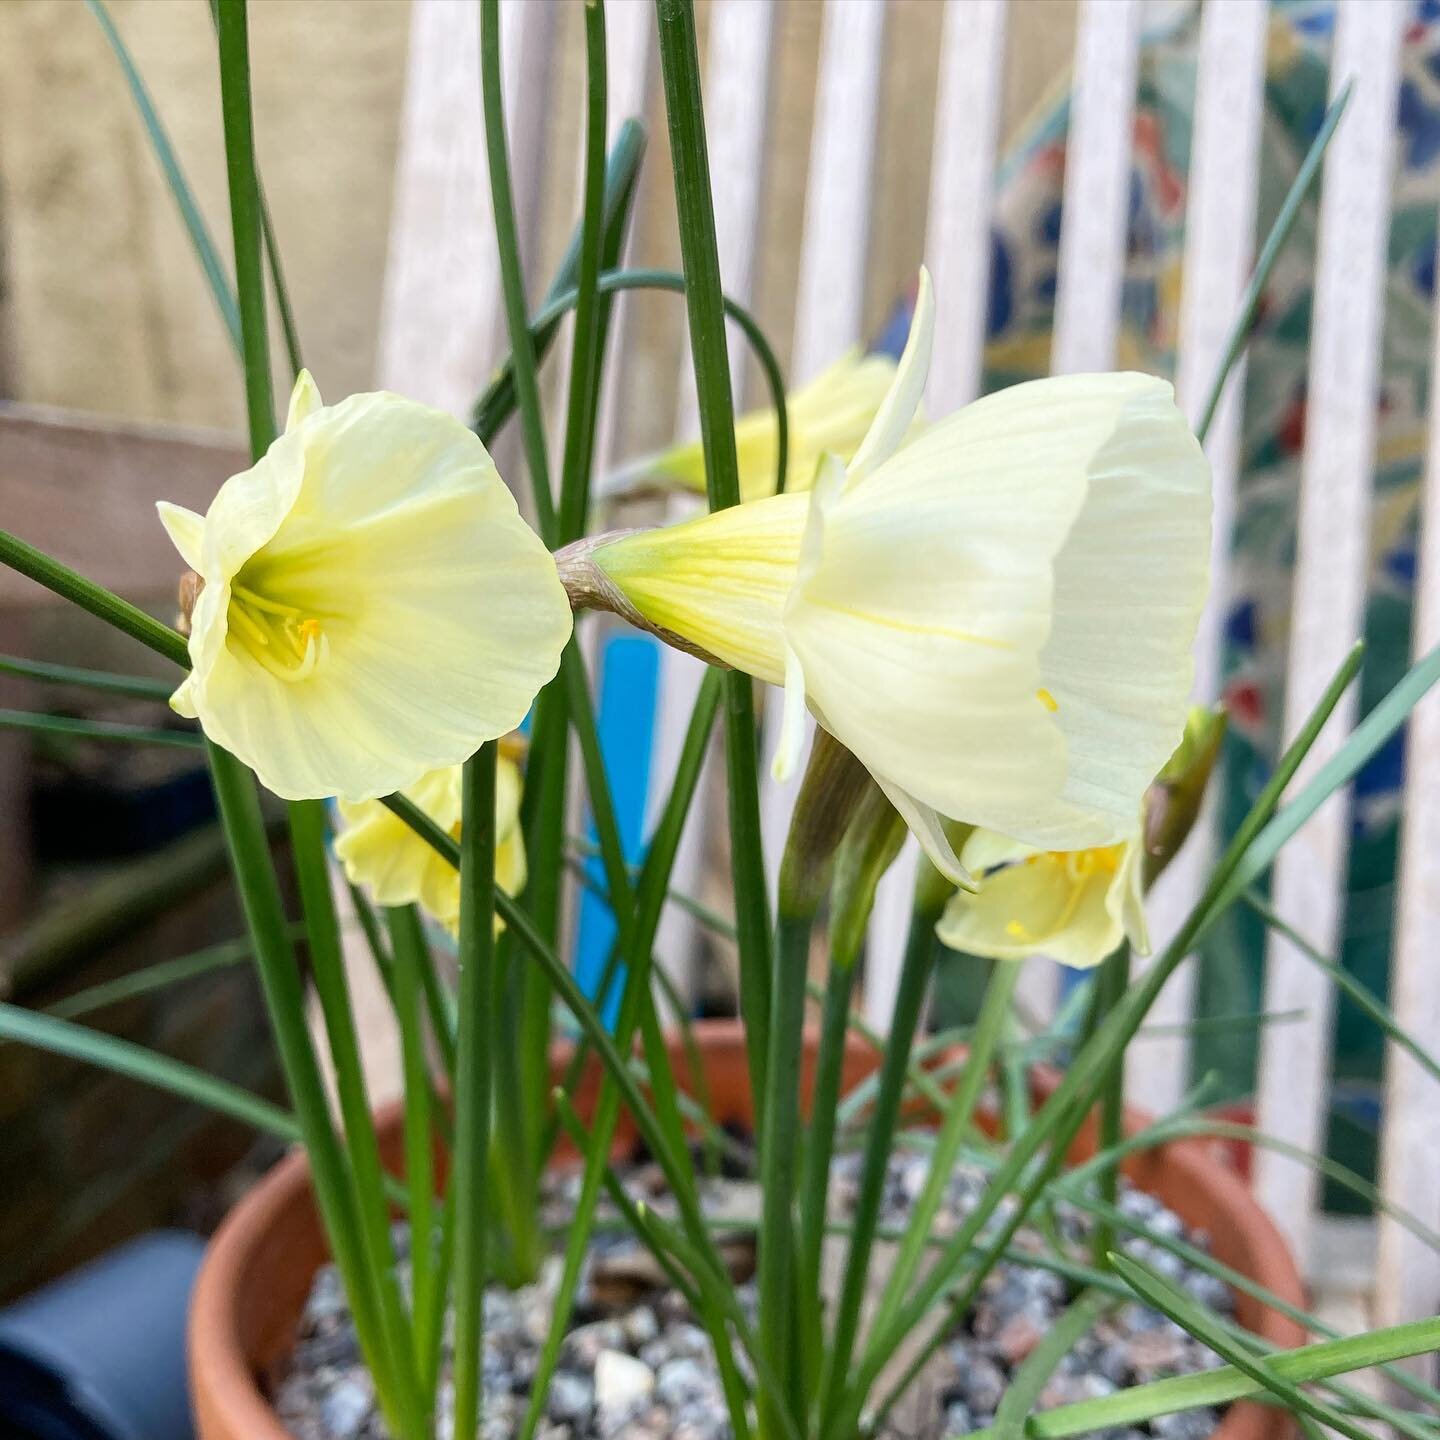 And they&rsquo;re out! My Narcissi bulbocodium &lsquo;PeticoatsWhite&rsquo; are finally in bloom.  I&rsquo;m such a huge fan of miniature narcissi and did a whole video raving about them in the autumn. I try and grow a new variety each year and am al